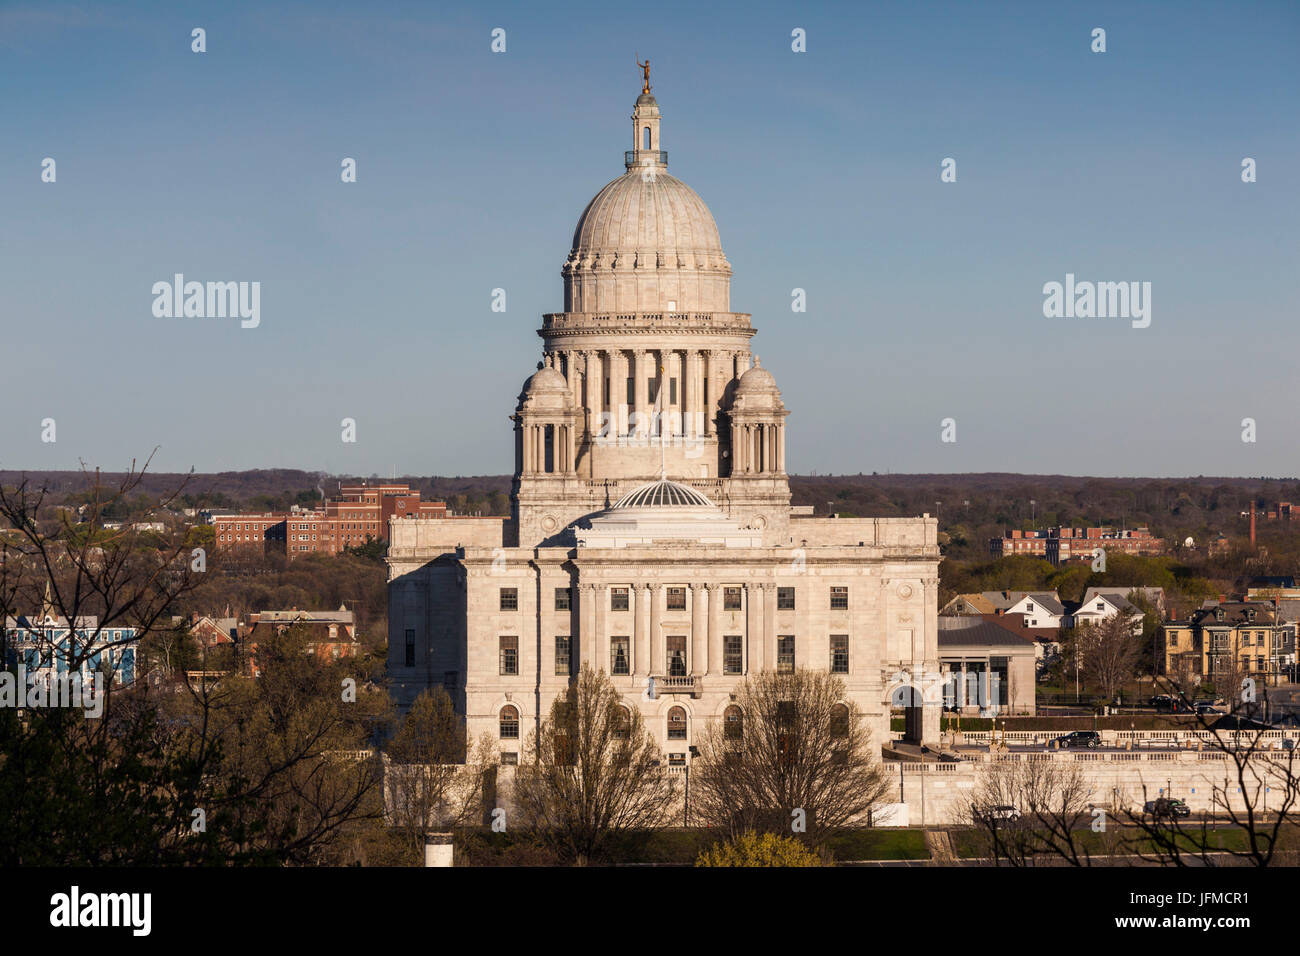 USA, Rhode Island, Providence, Rhode Island State House, exterior, elevated view Stock Photo